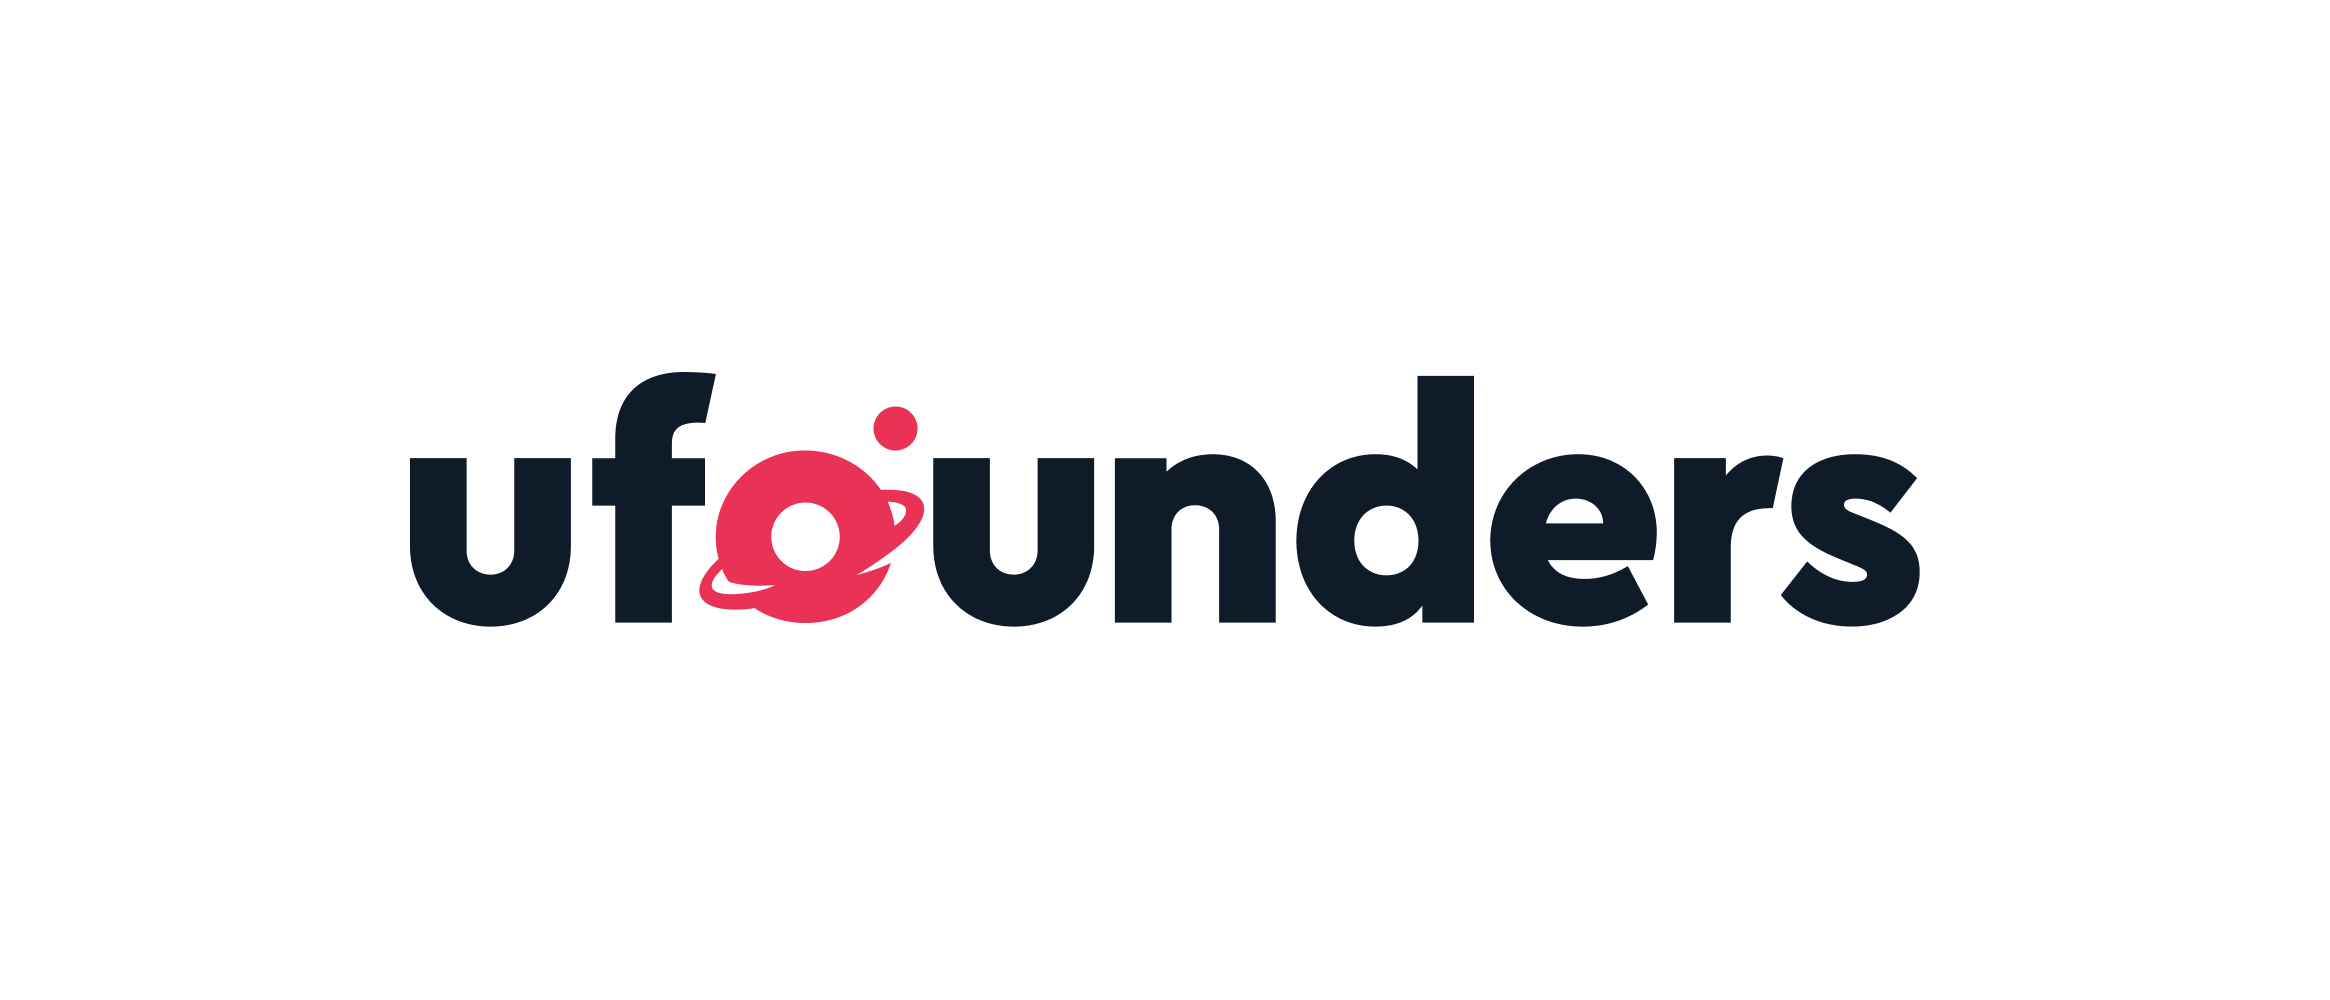 Ufounders